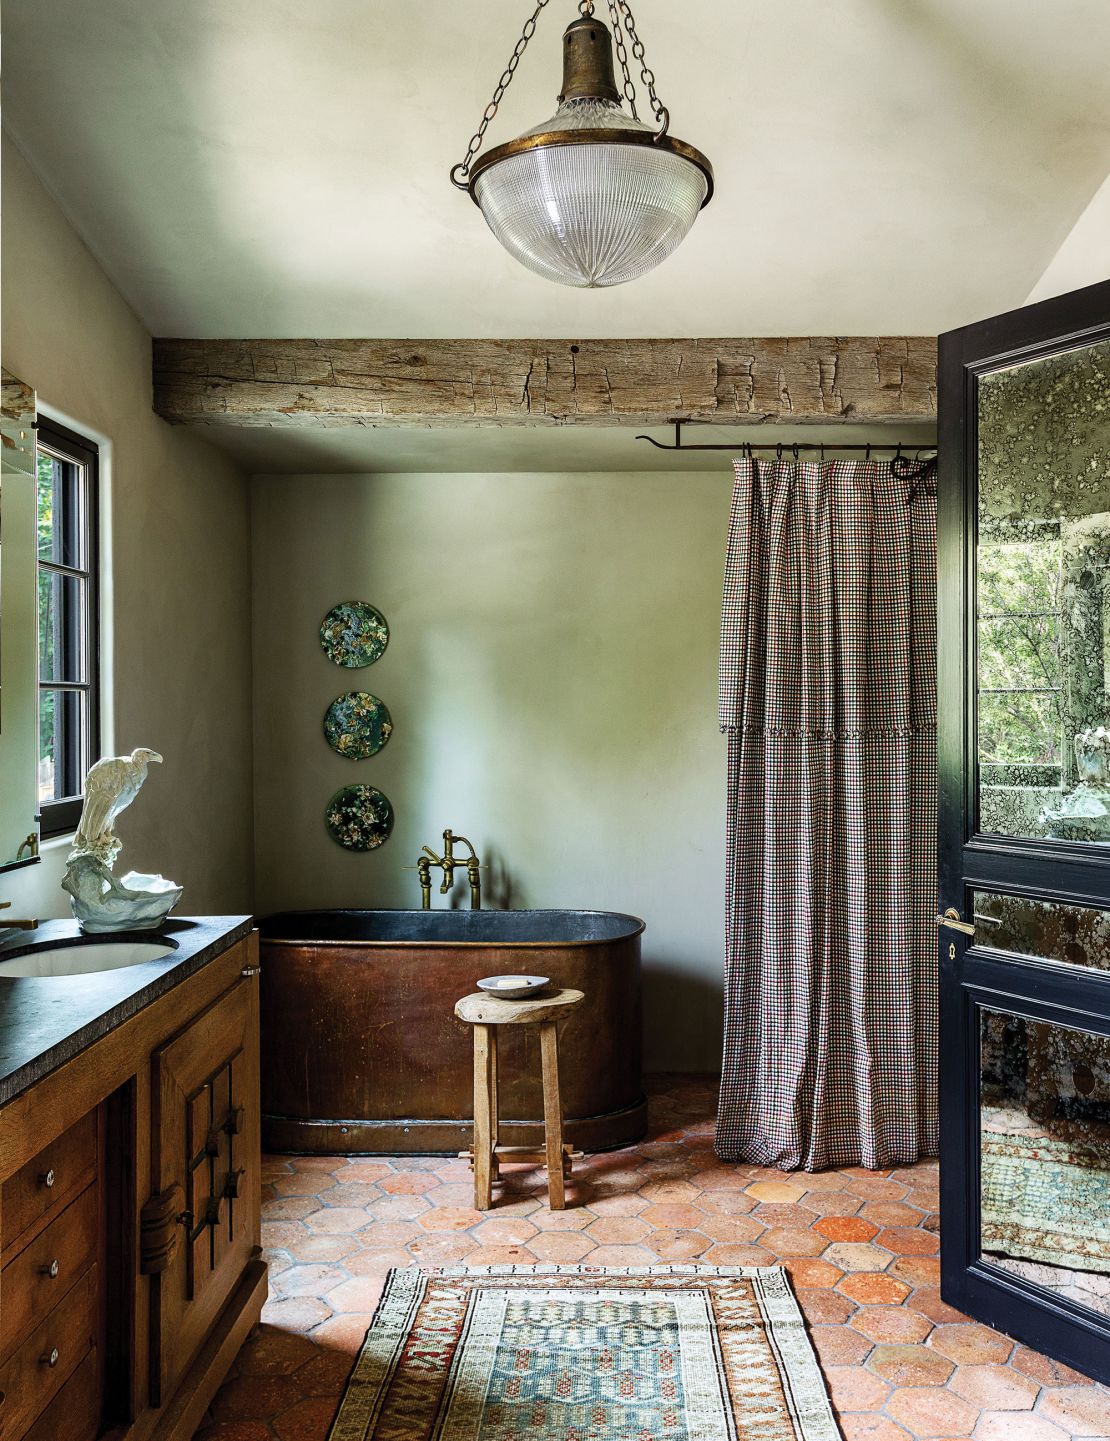 A 19th-century copper bathtub is the centerpiece to this stripped-back bathroom.